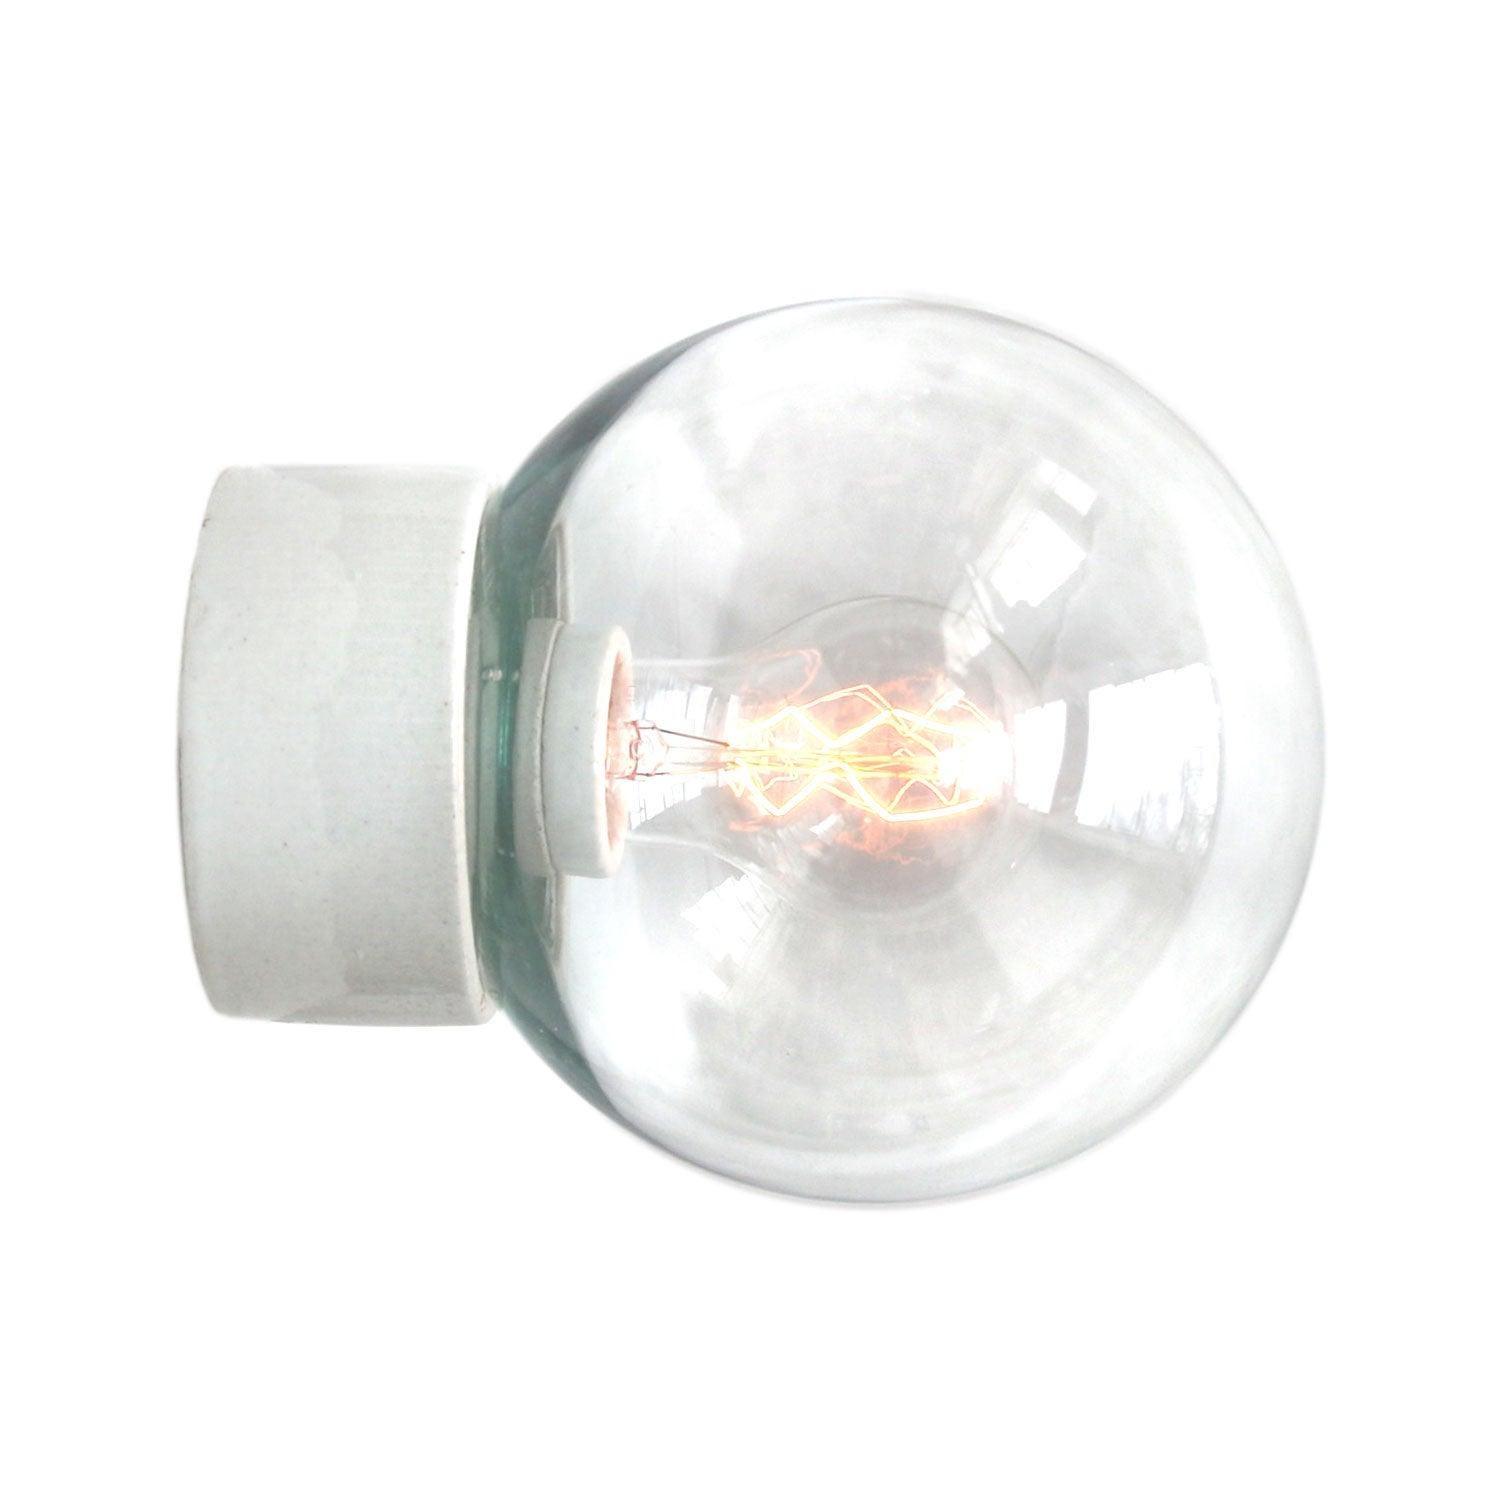 White Porcelain Vintage Industrial Clear Glass Wall Ceiling Lamp Scones For Sale